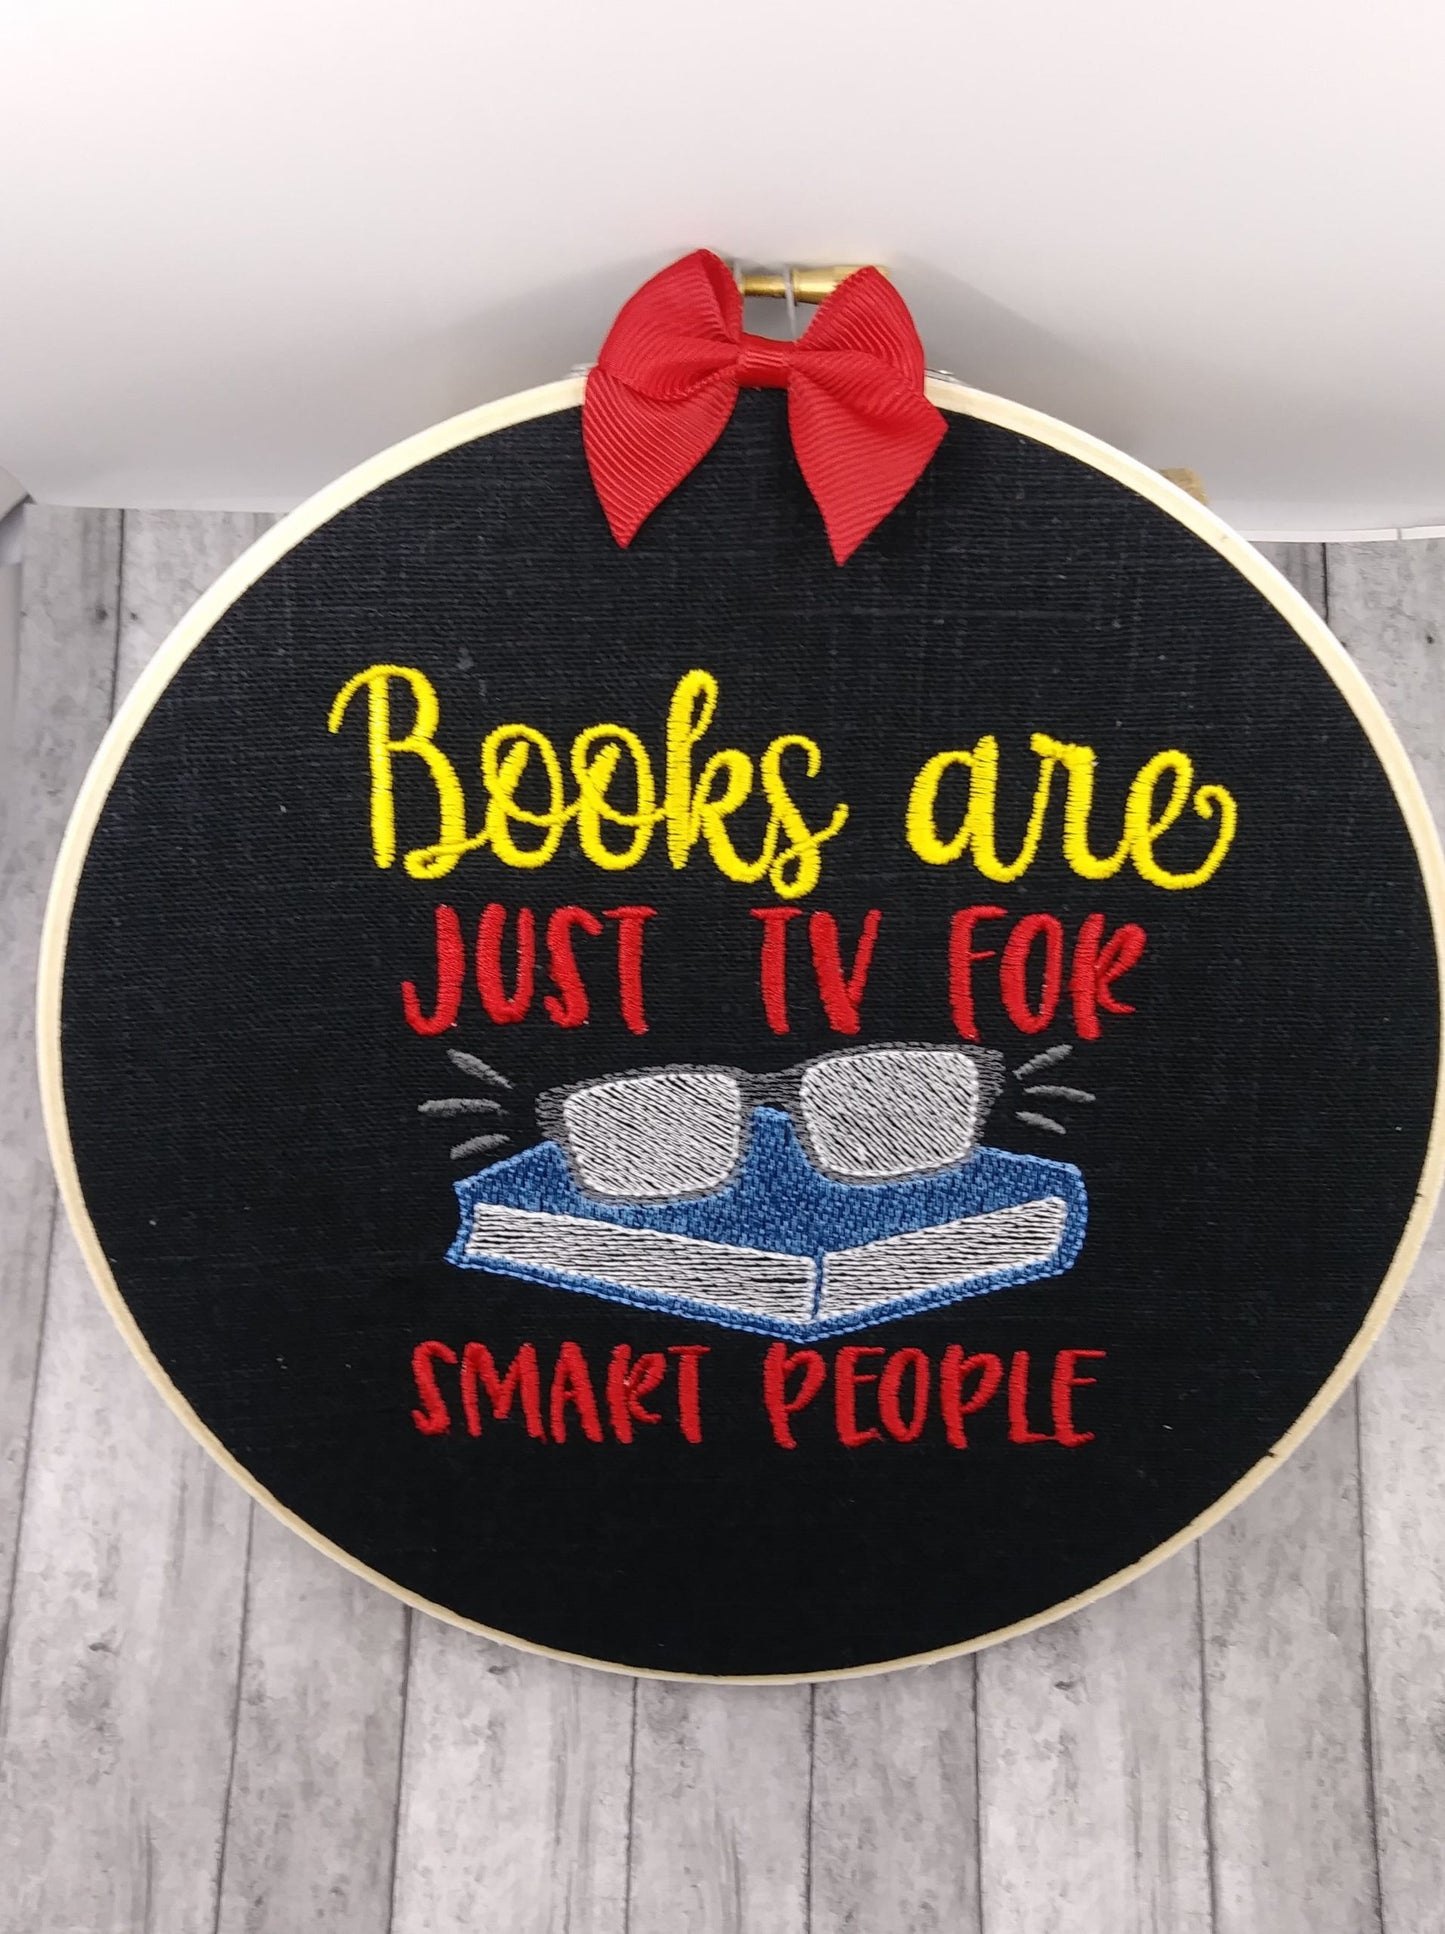 TV for smart people - 3 sizes- Digital Embroidery Design